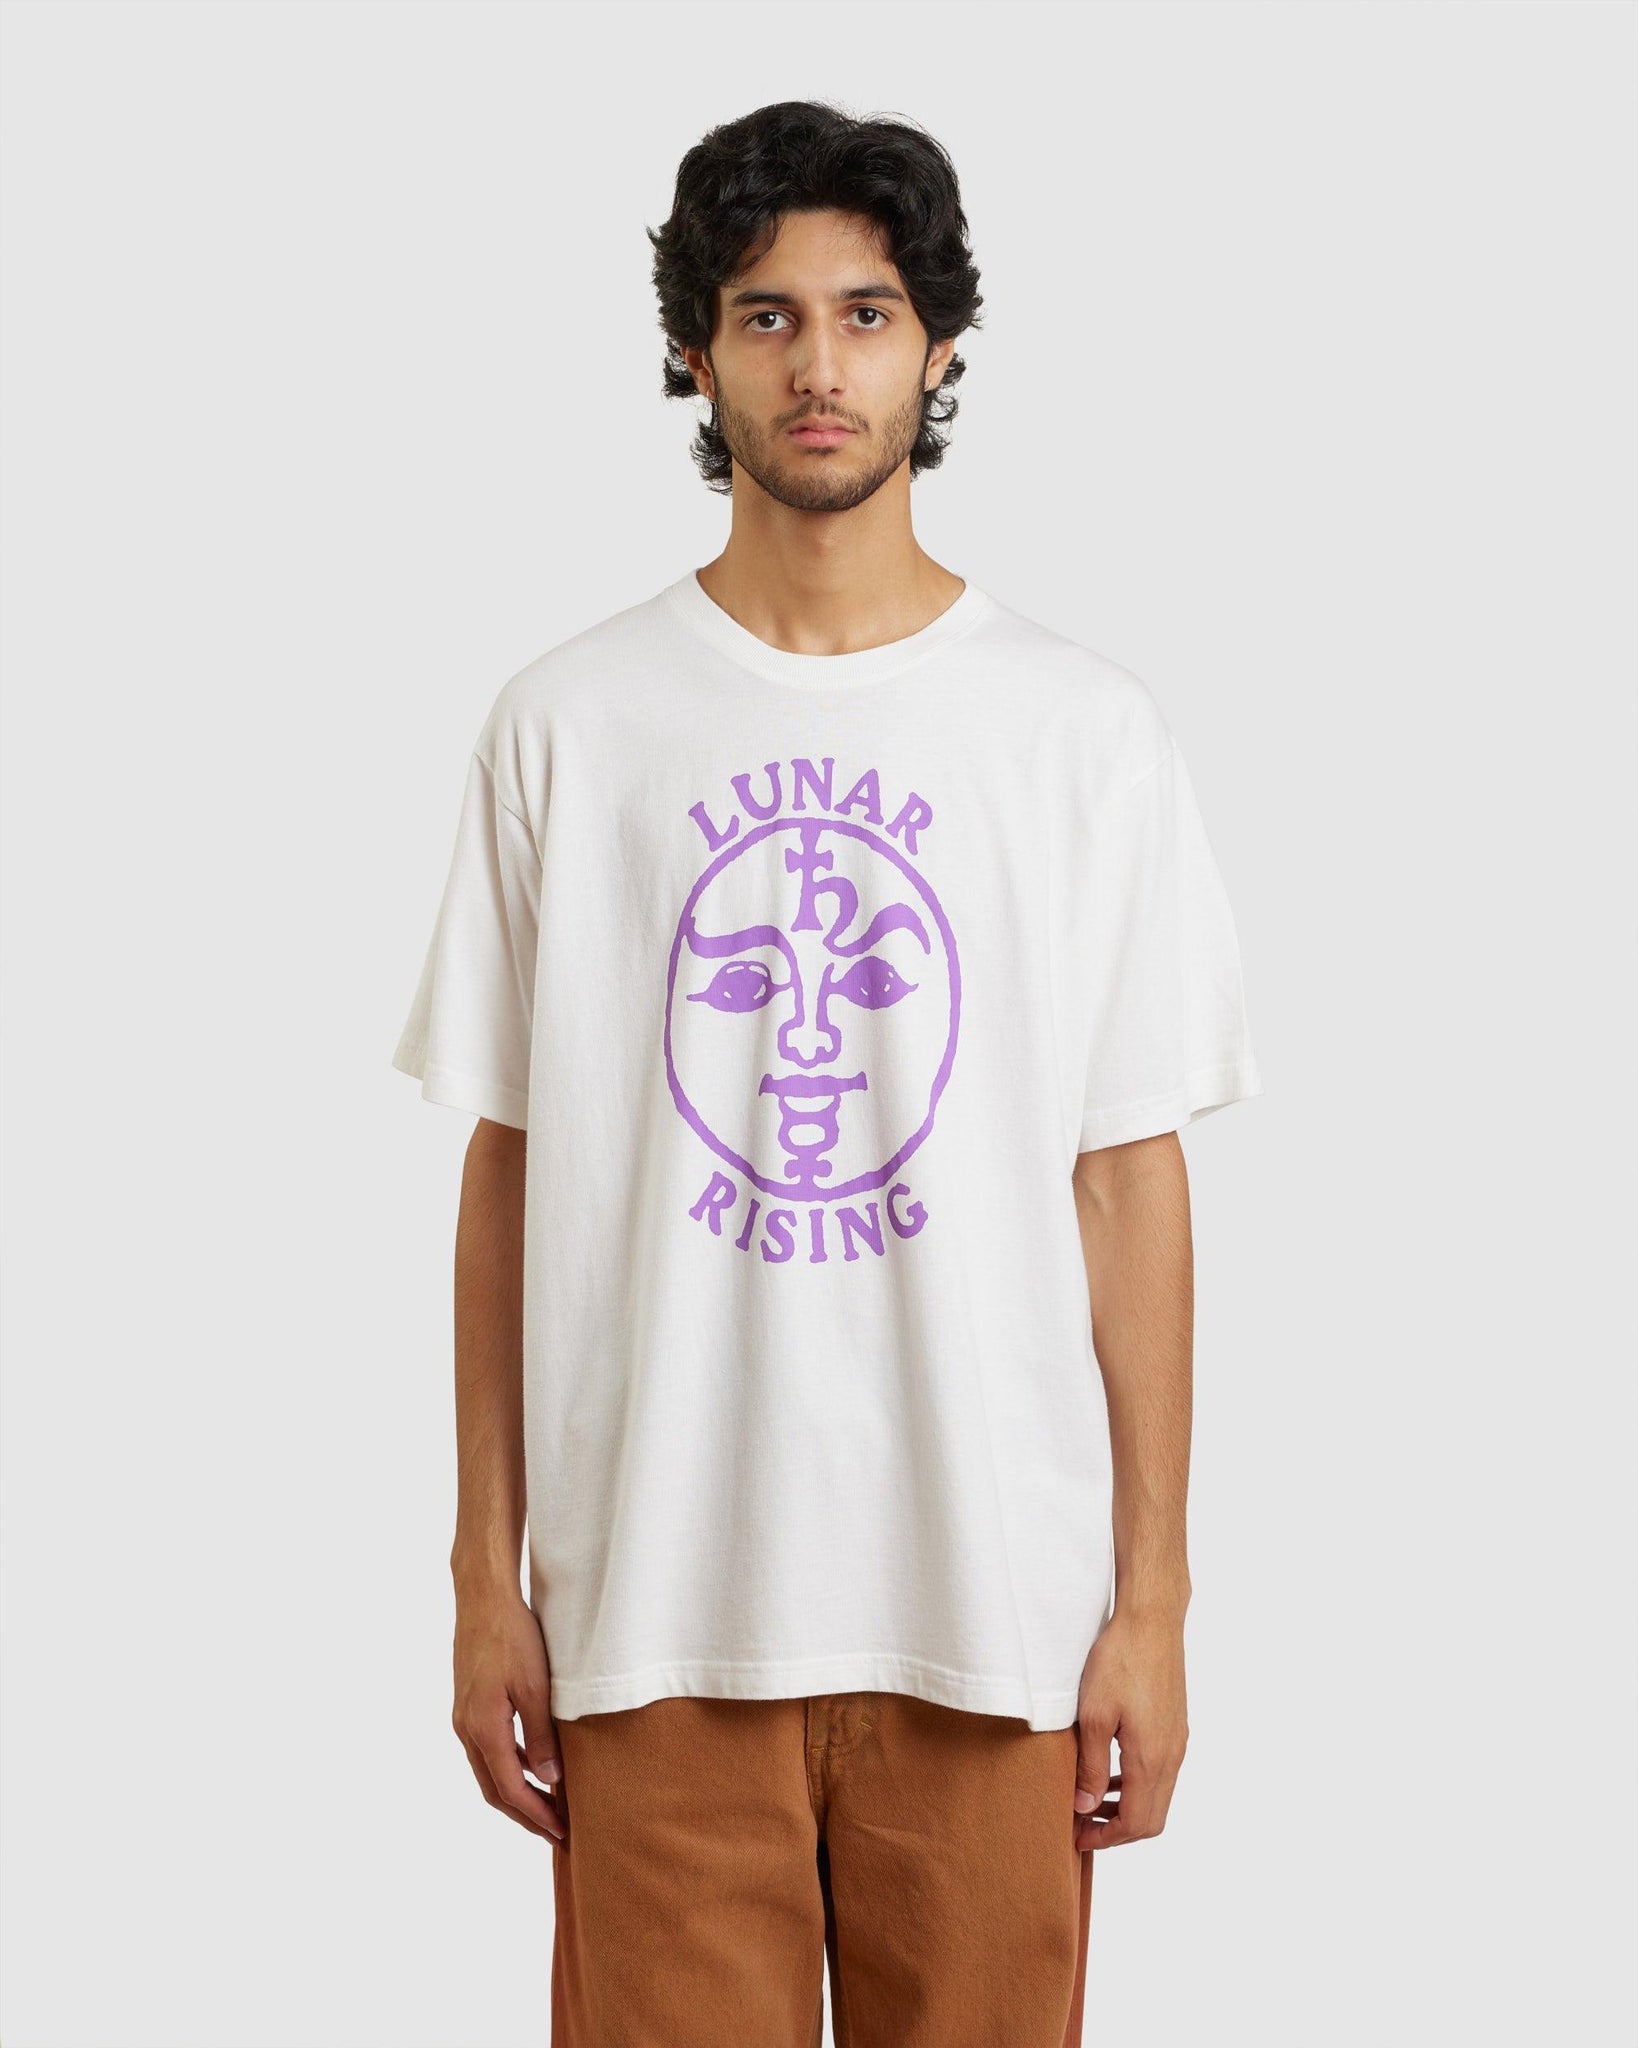 Lunar Rising SS Tee - {{ collection.title }} - Chinatown Country Club 